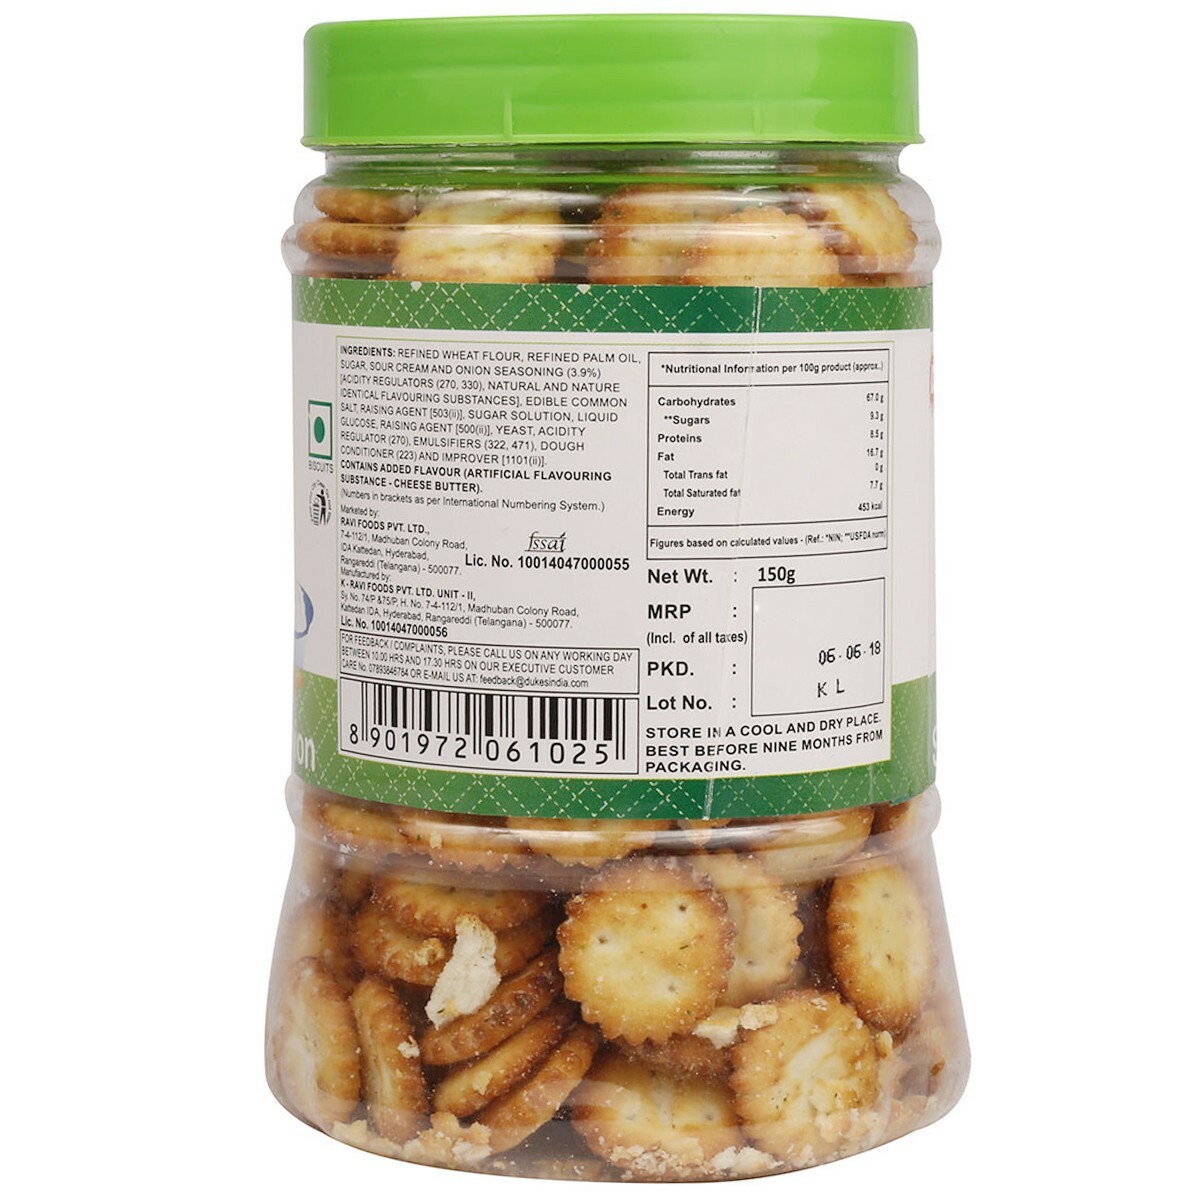 Dukes Nibbles Sour Cream & Onion Baked Snack 150g